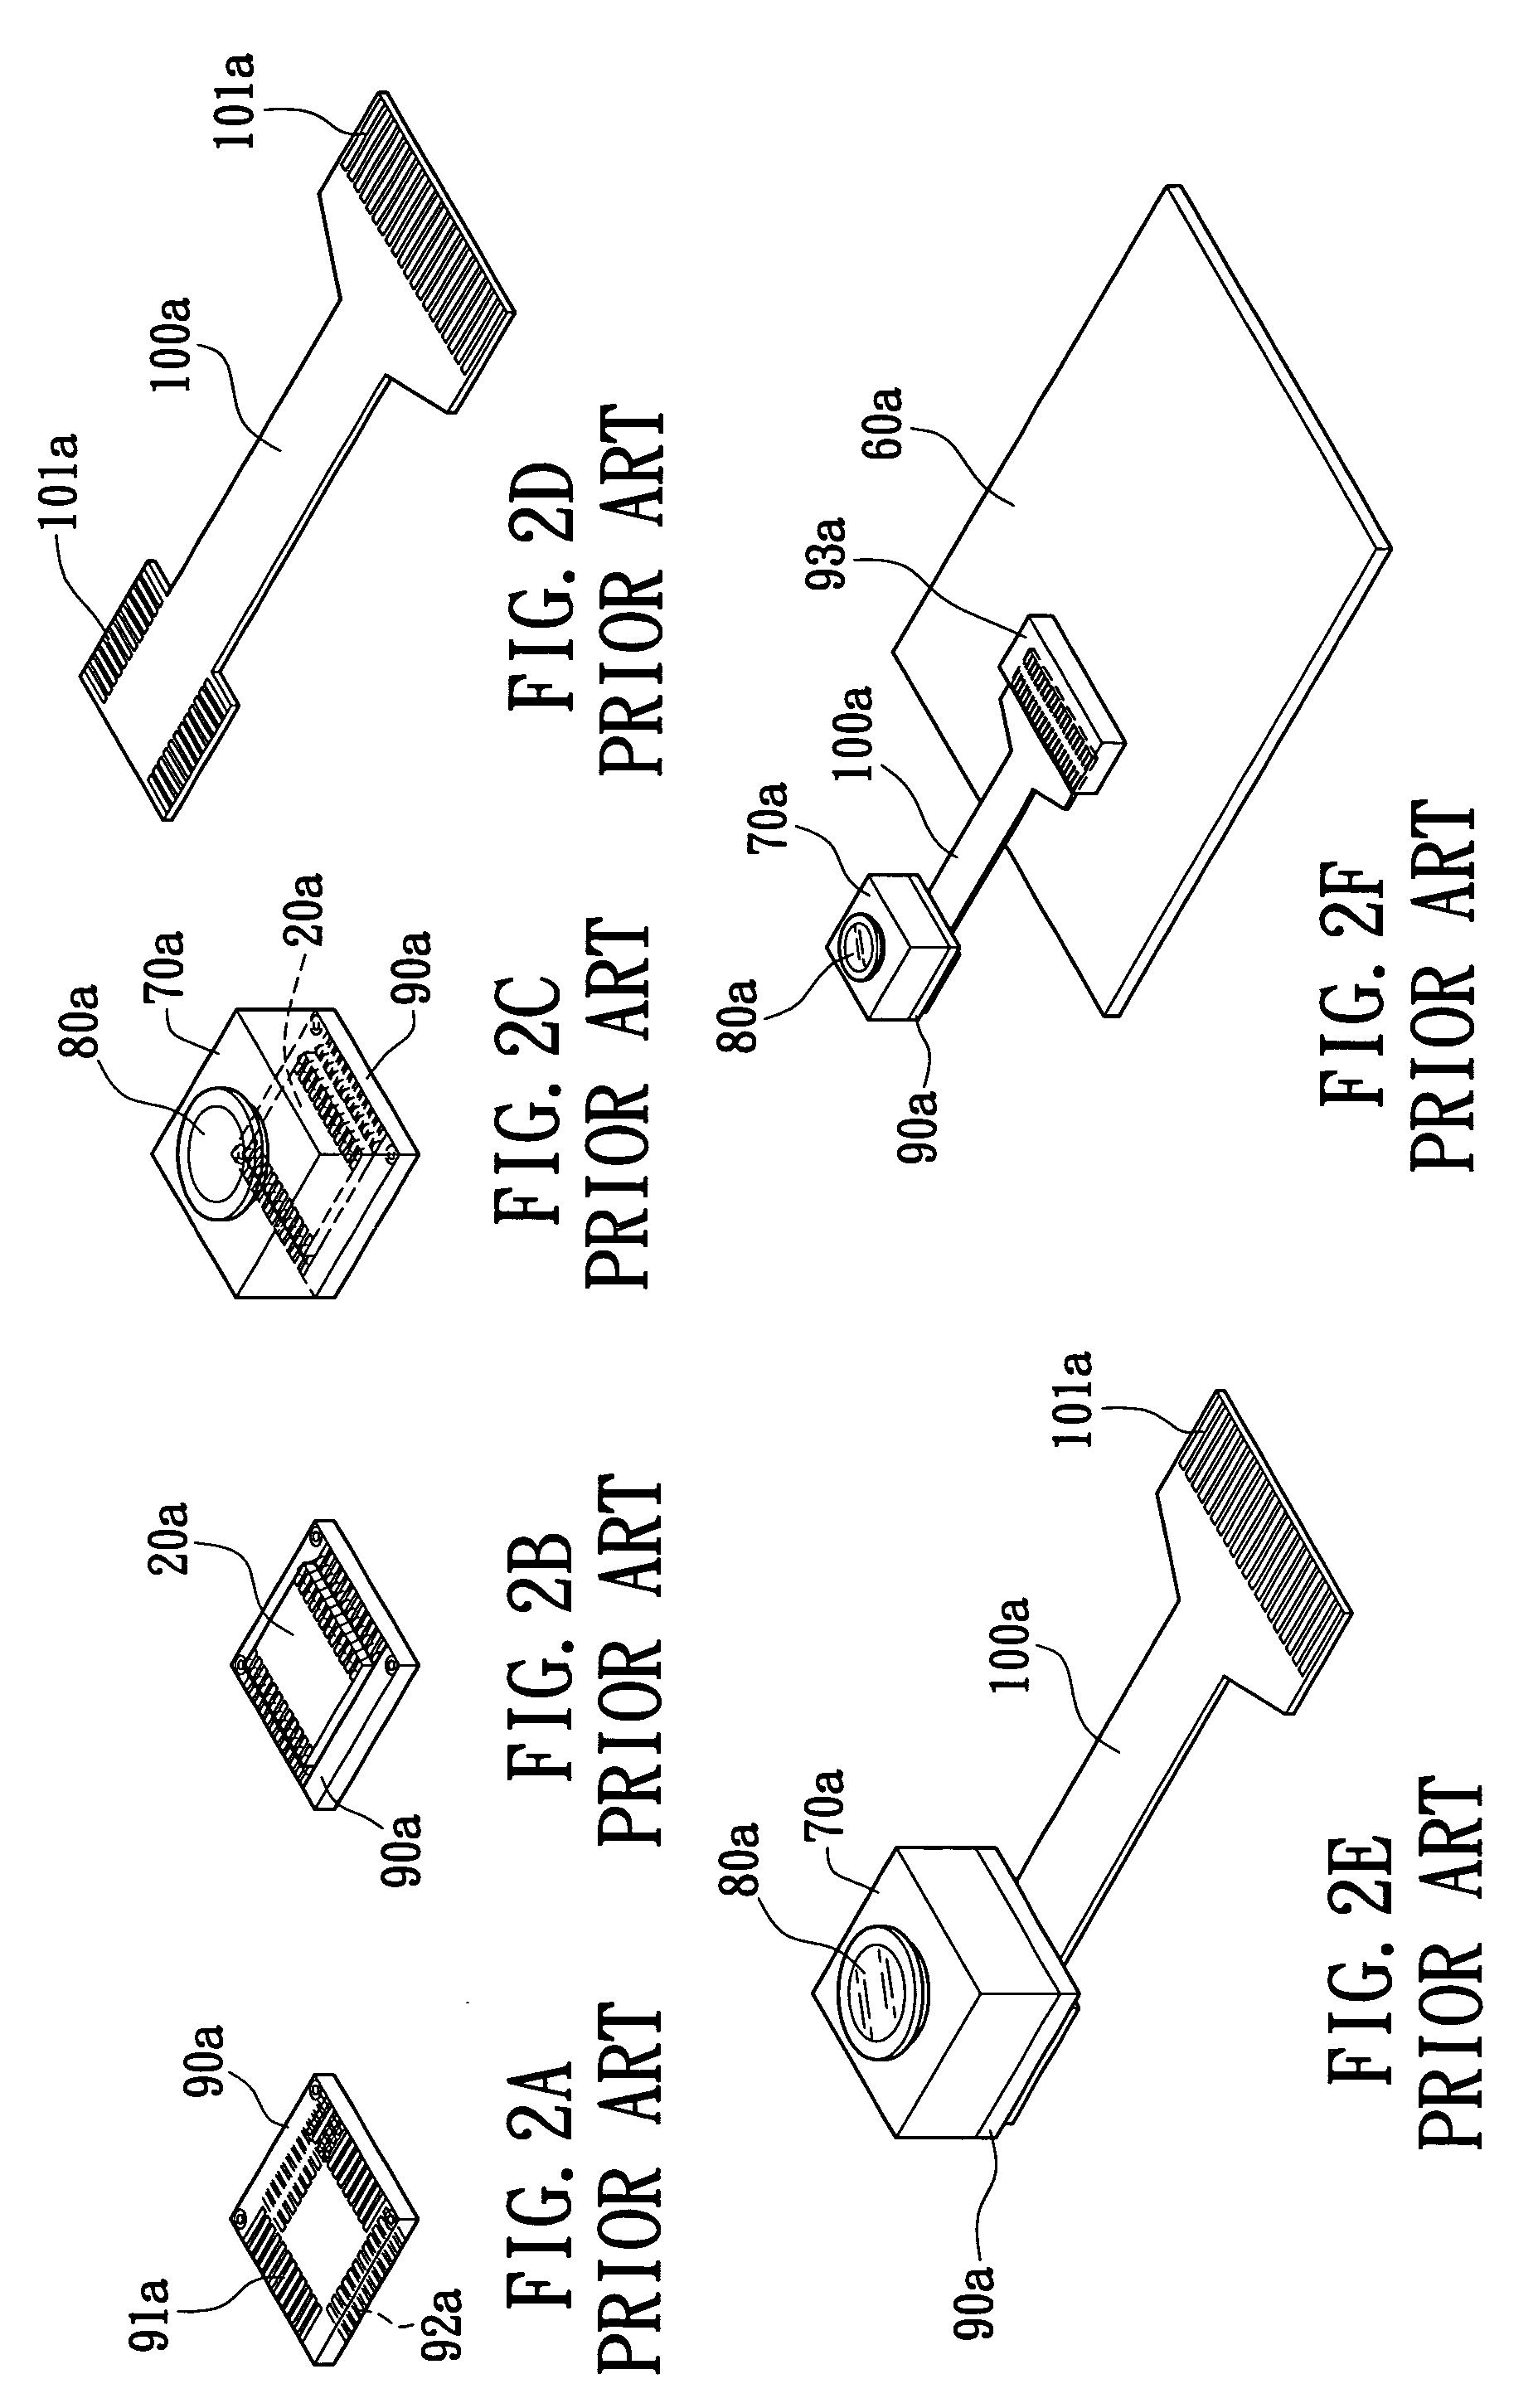 Chip package substrate having soft circuit board and method for fabricating the same